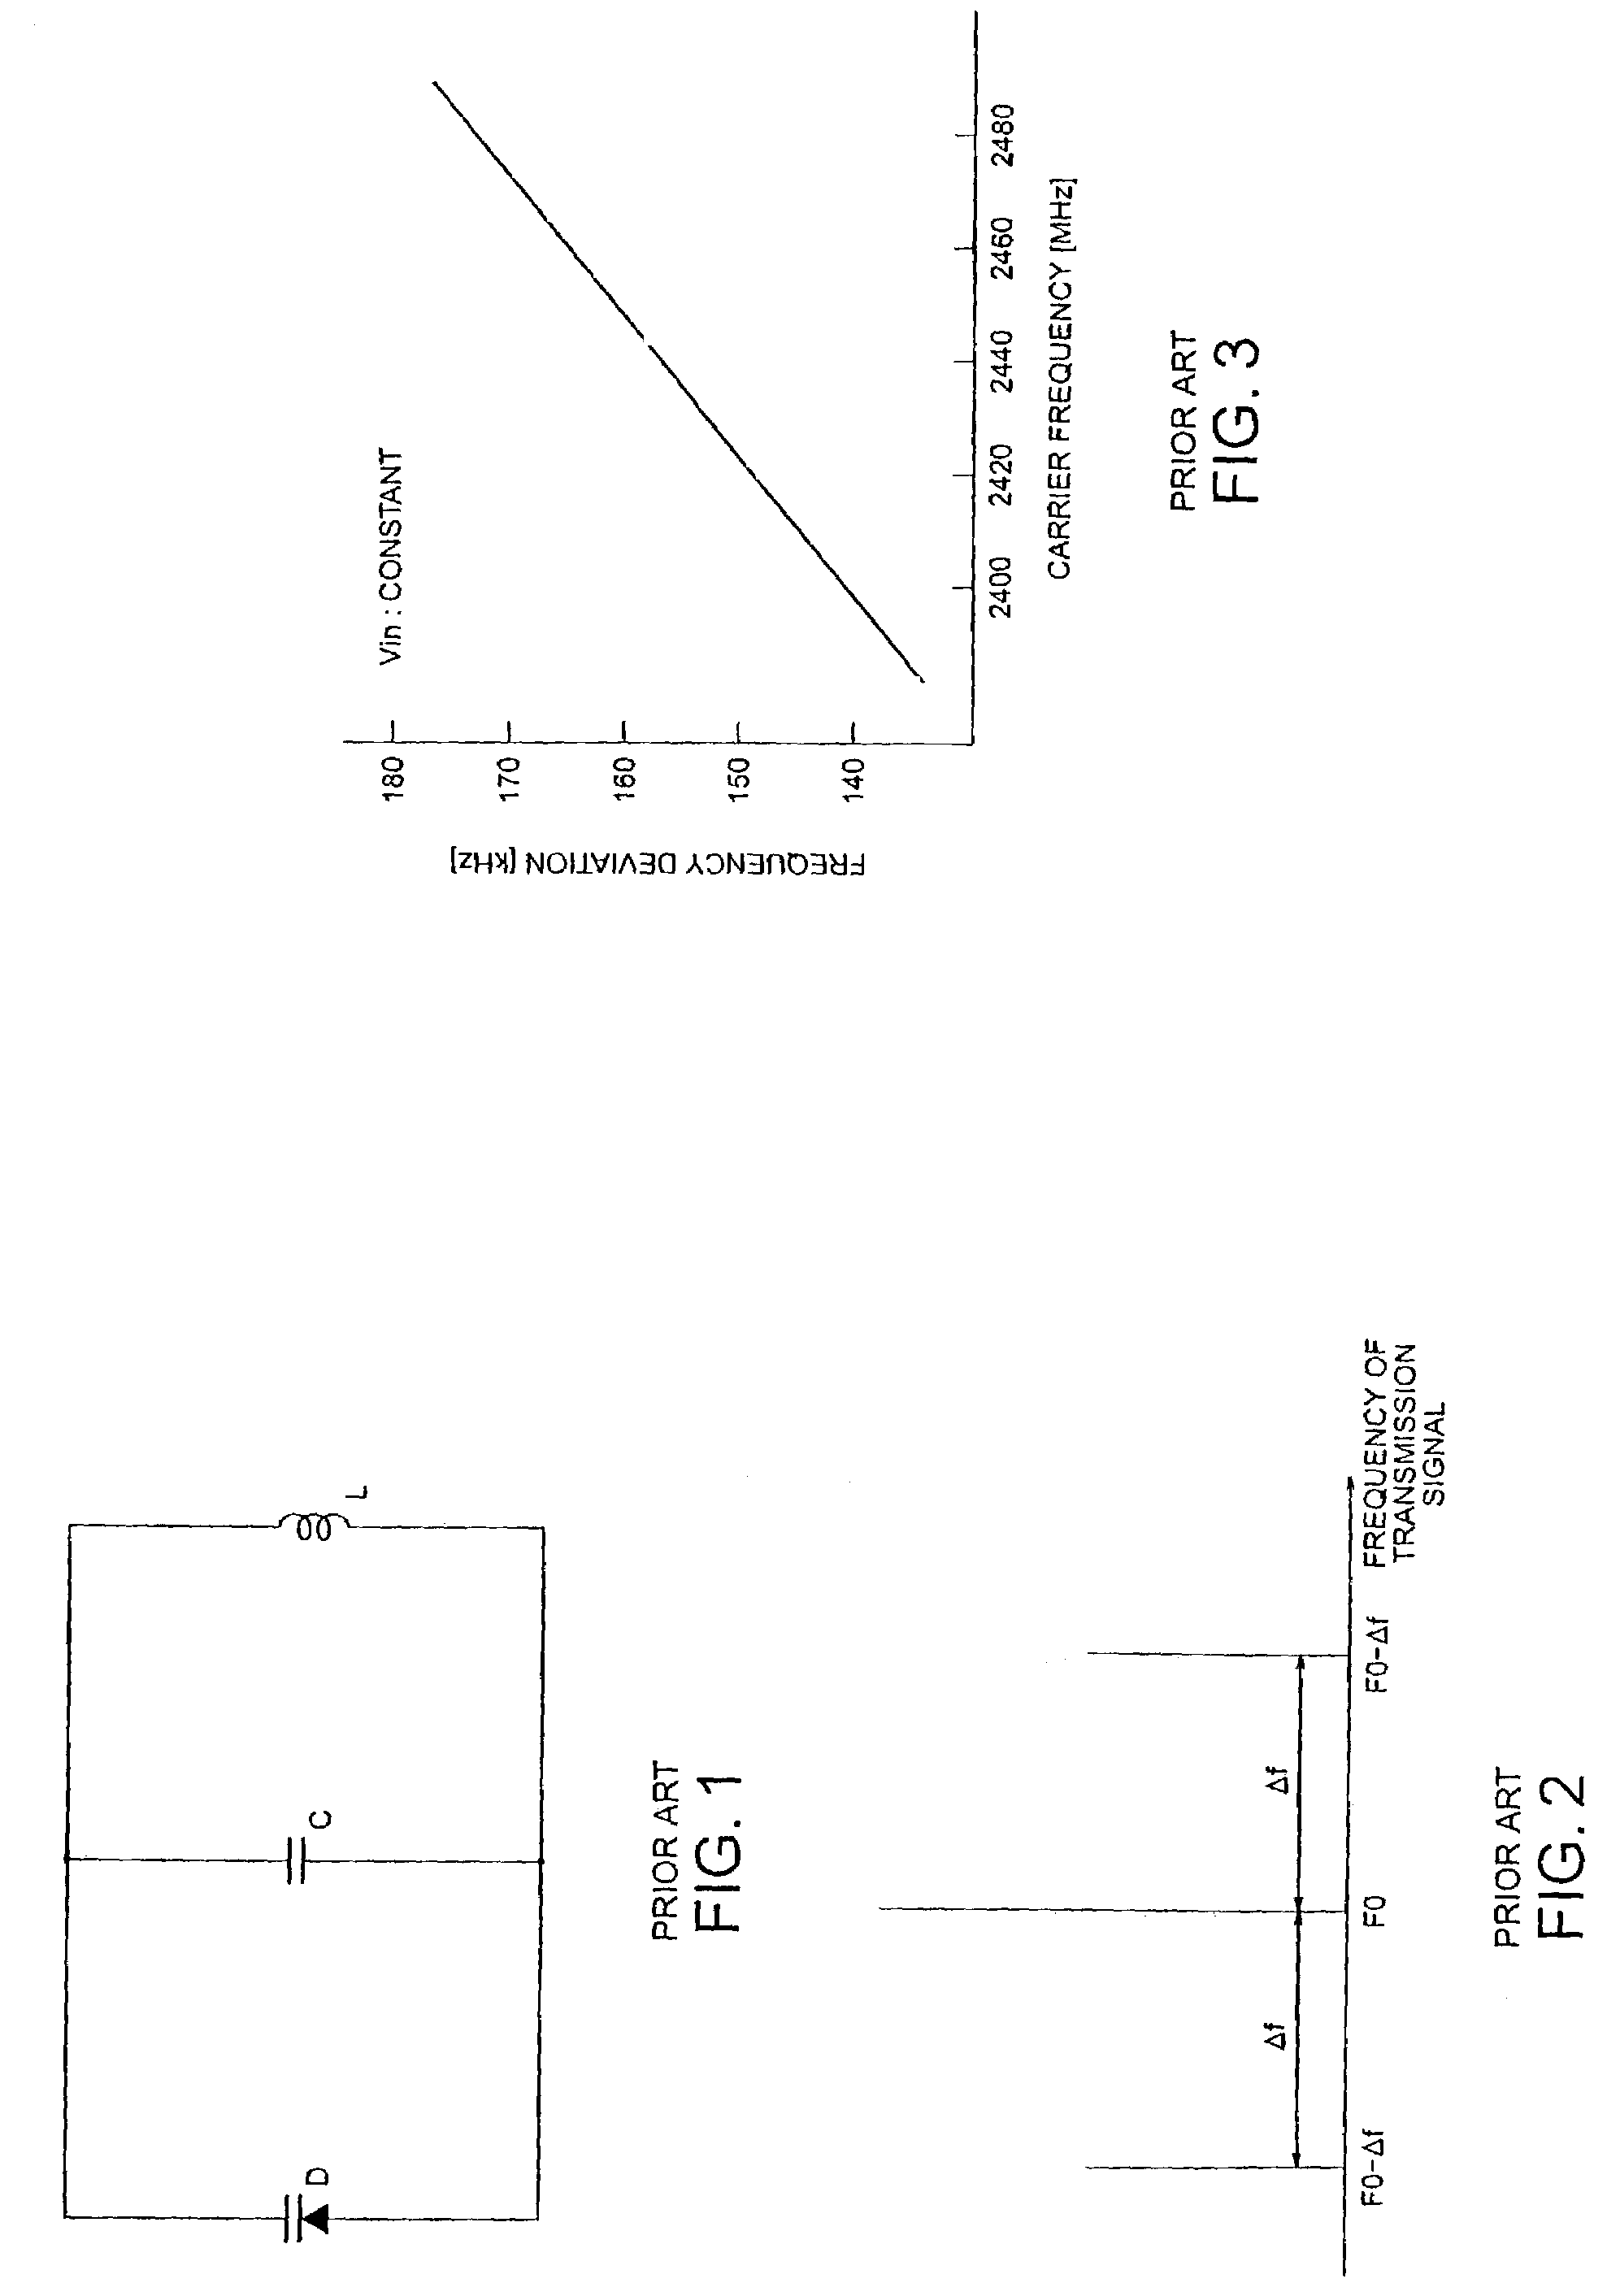 Frequency hopping communication device with simple structure